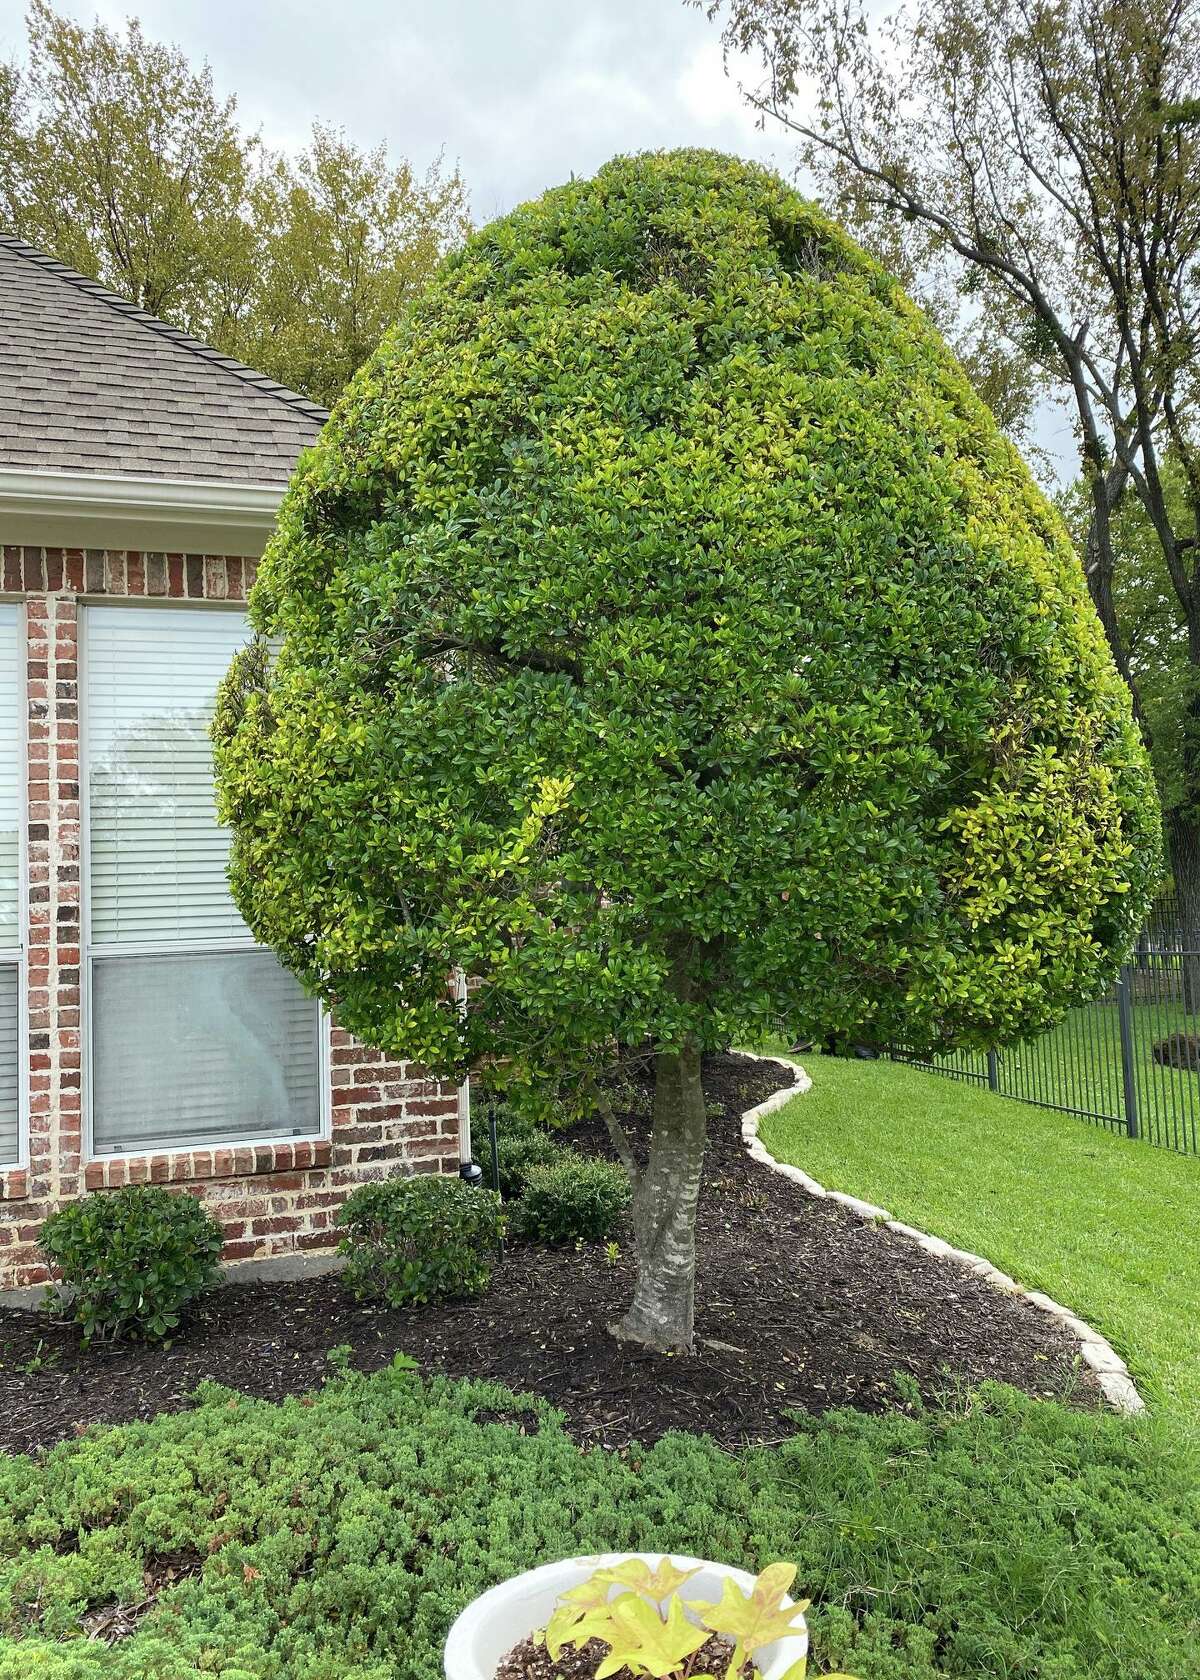 This yaupon holly would benefit from a less rigid pruning approach.